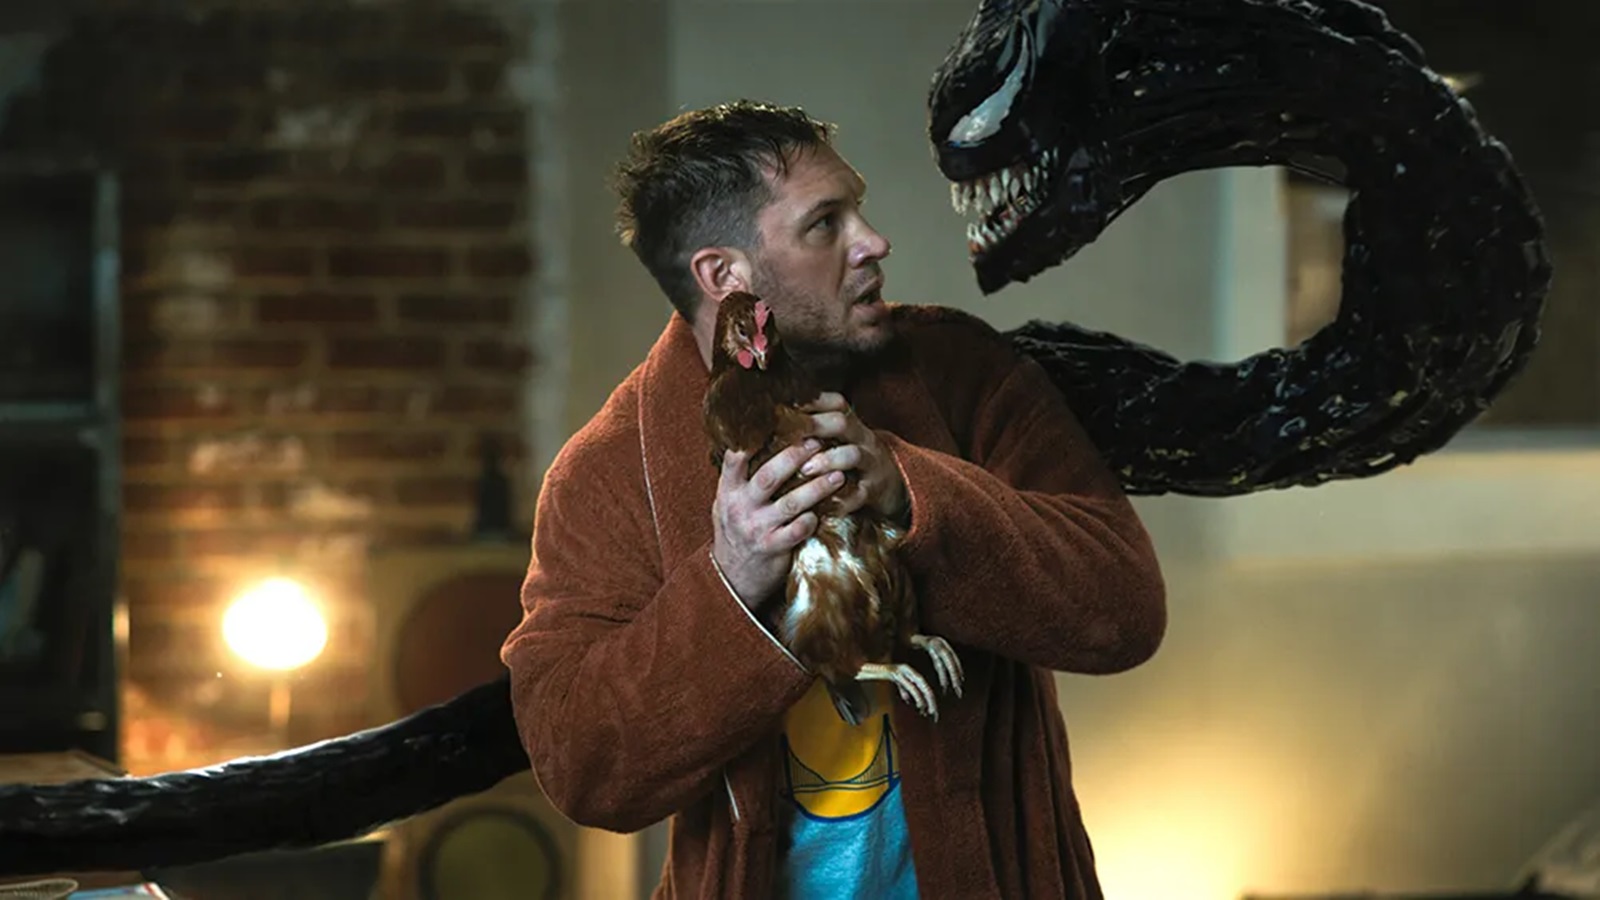 Venom 3: Tom Hardy thanks the team working on the film, confirming that filming is underway